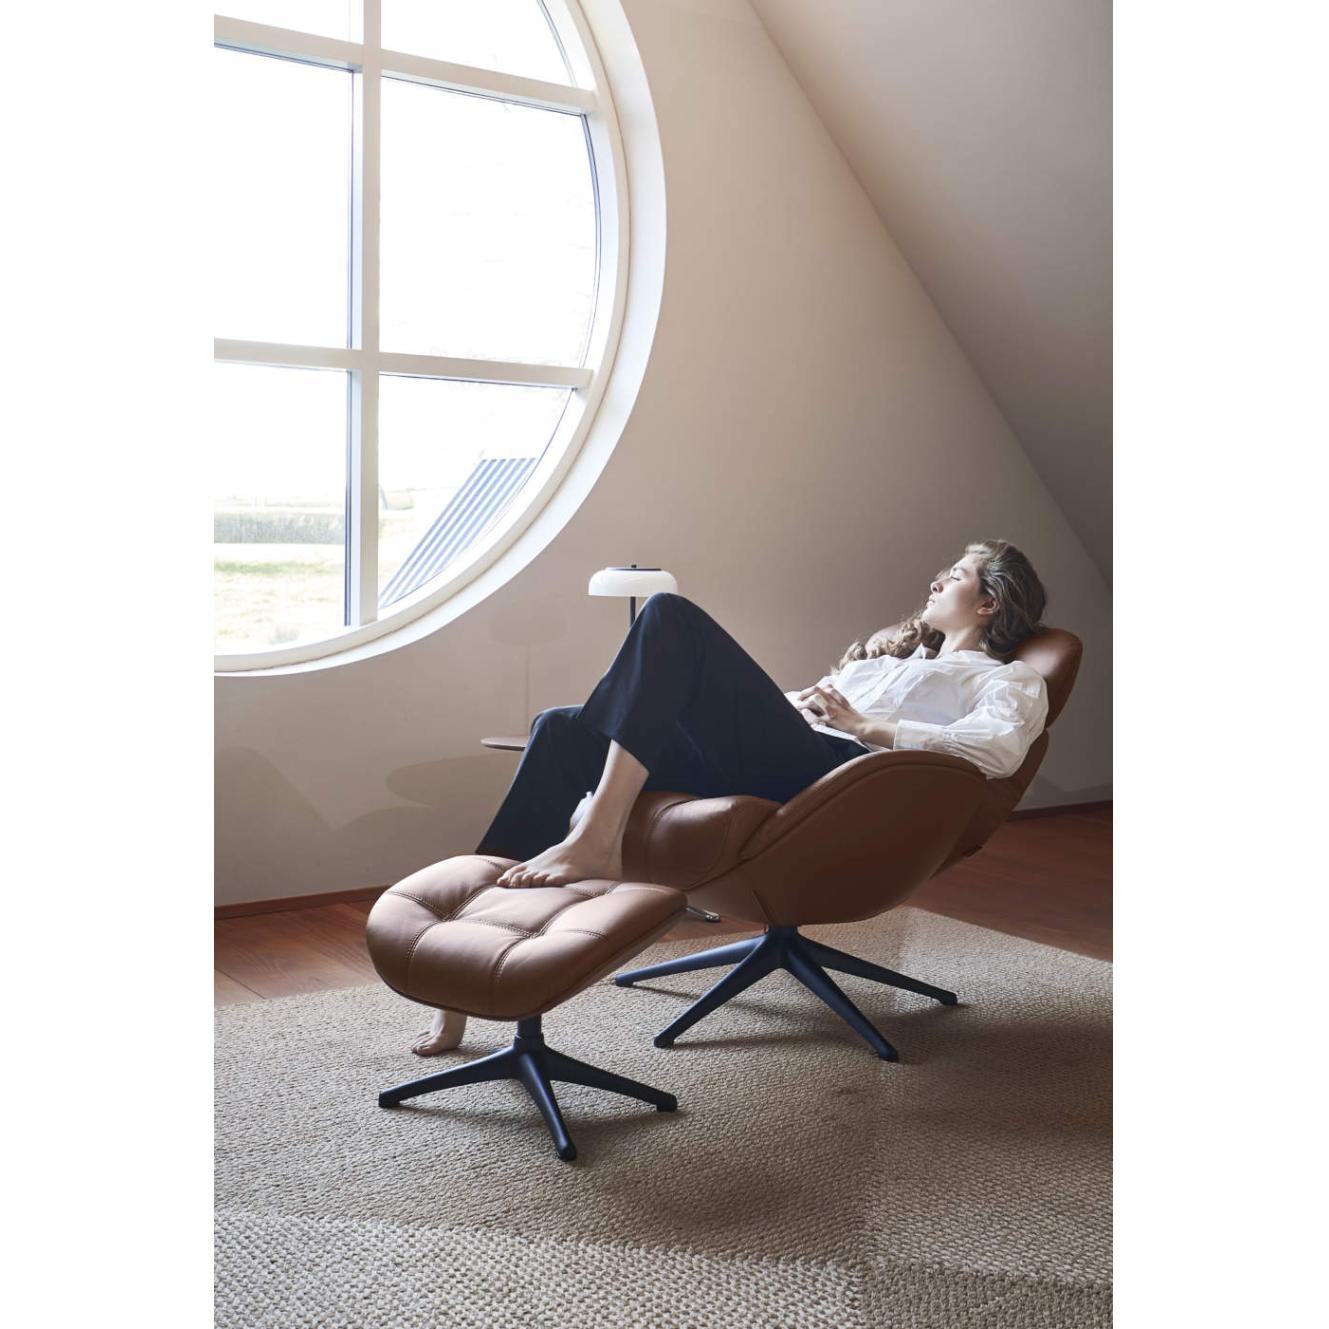 Flexlux Chester relax chair // Chester relax fotel